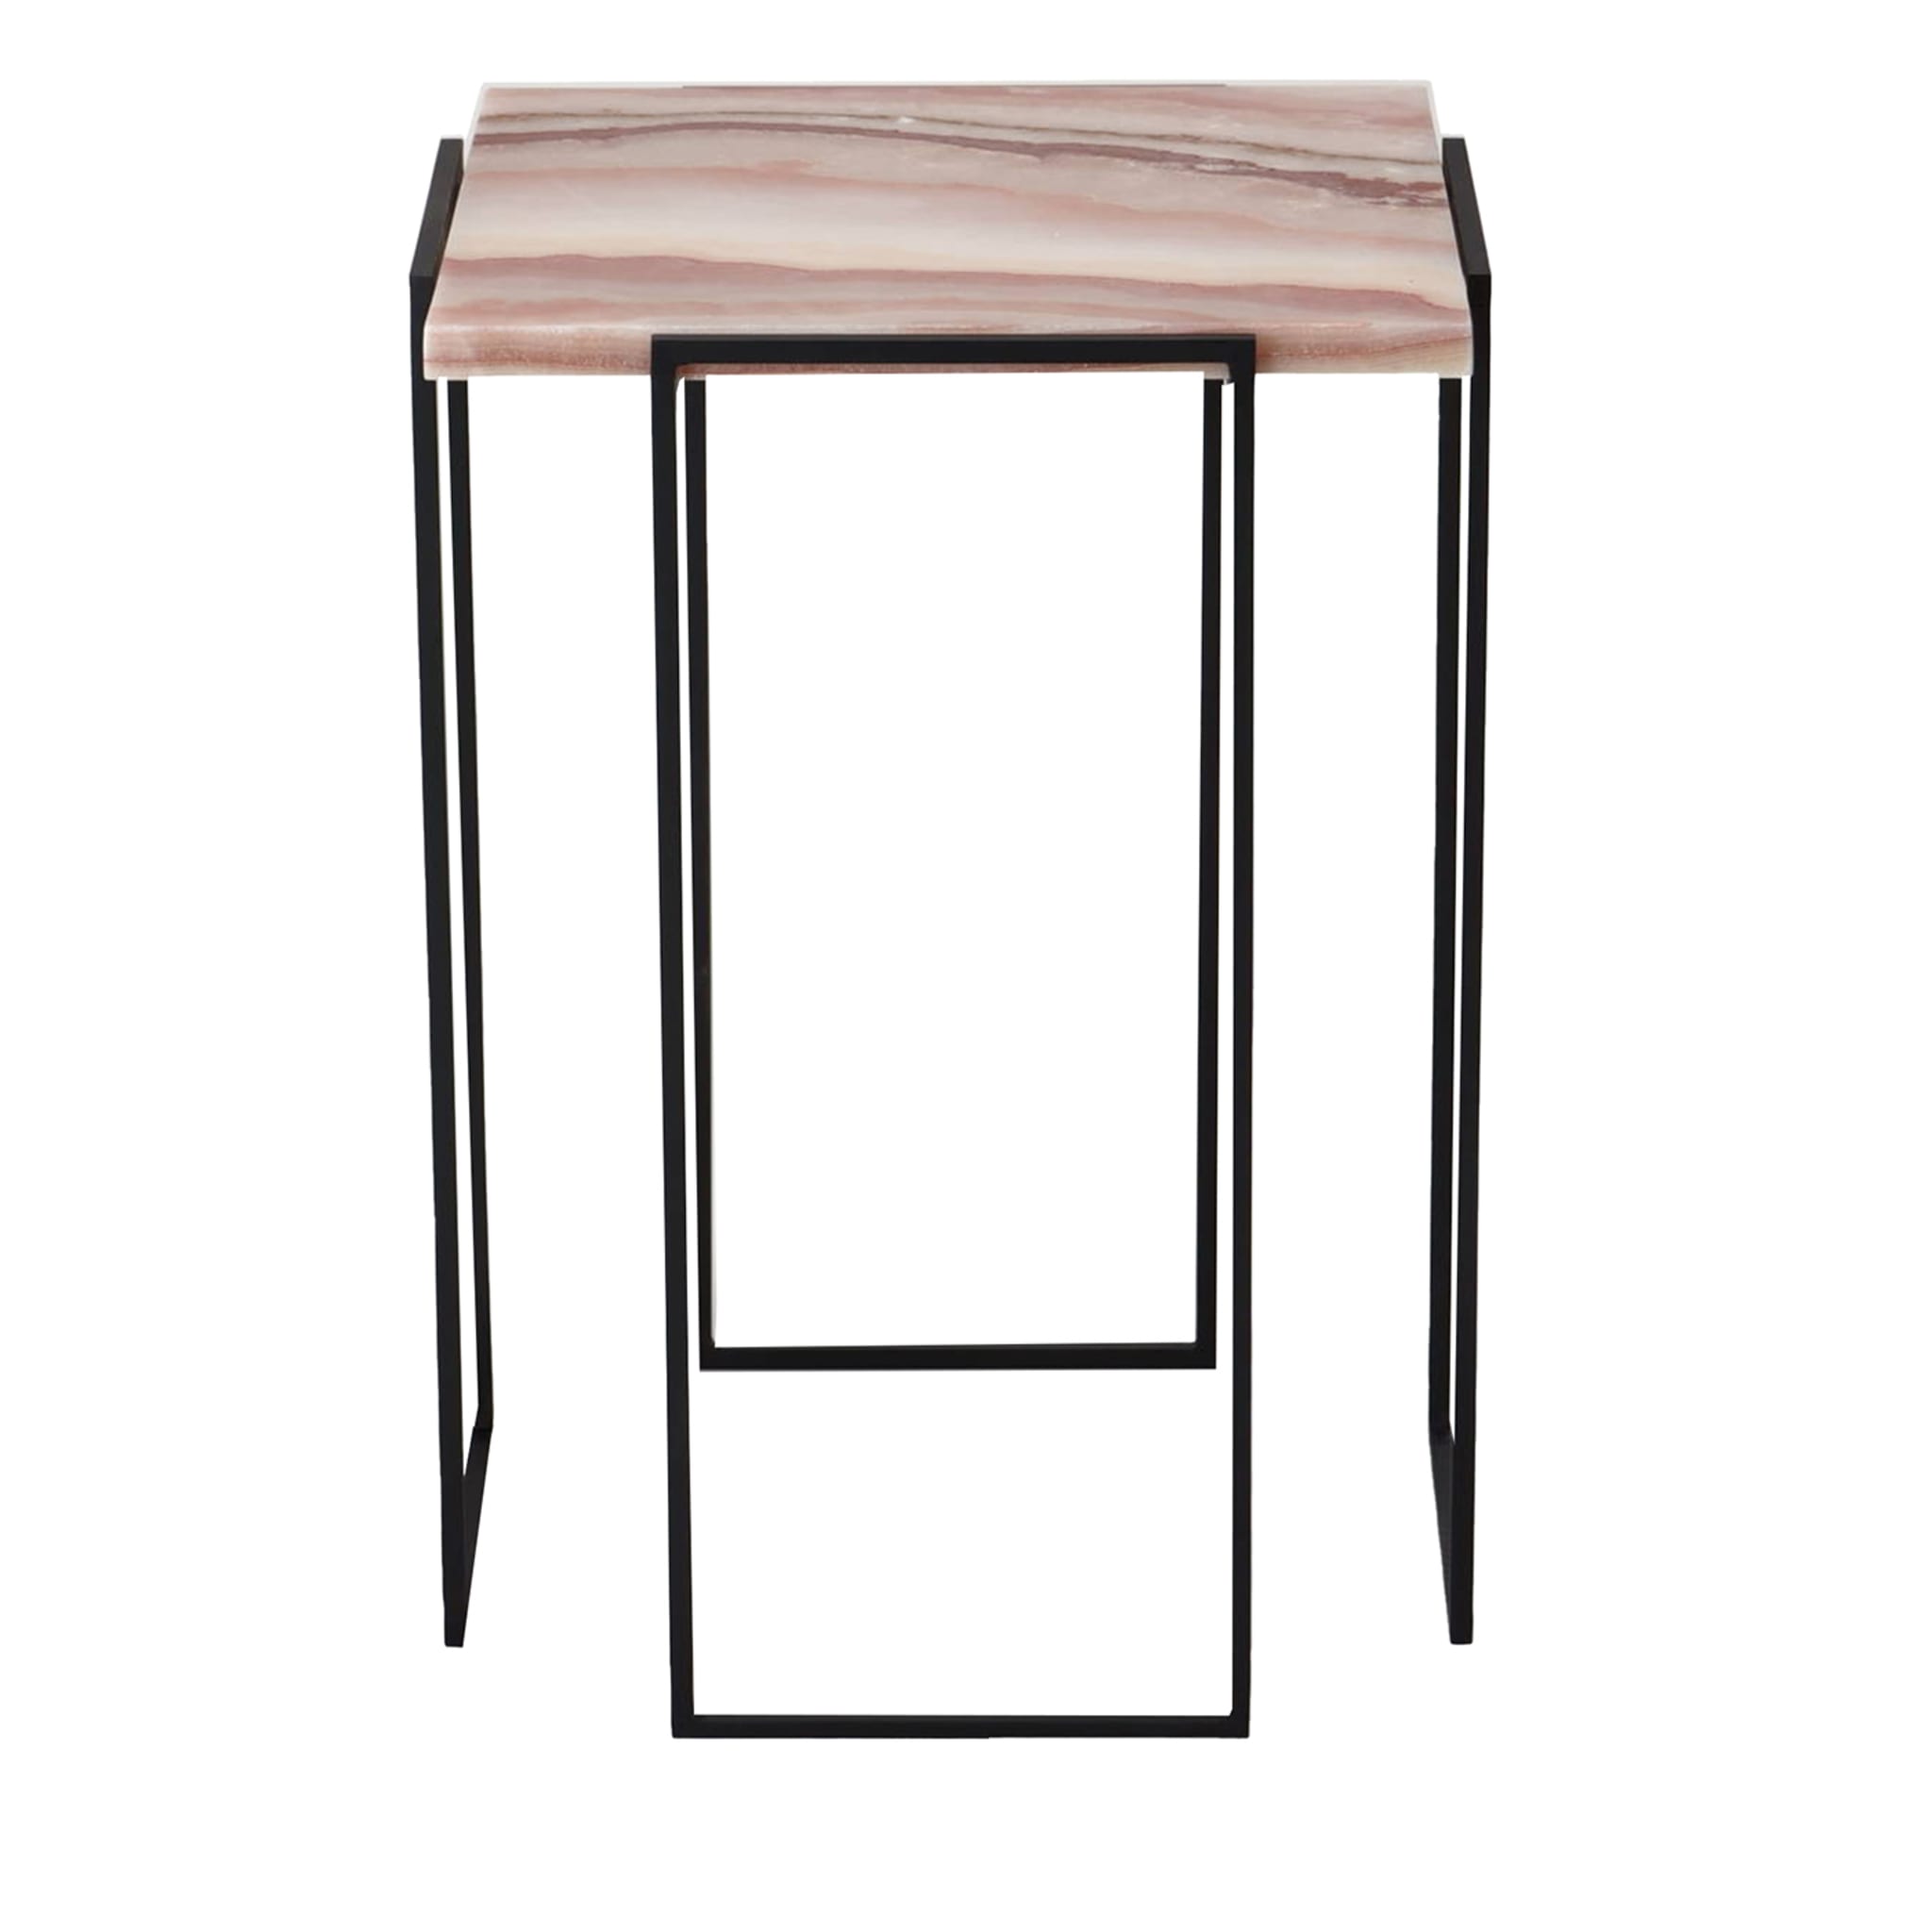 Kaus Black Pink Onyx Side Table - Main view